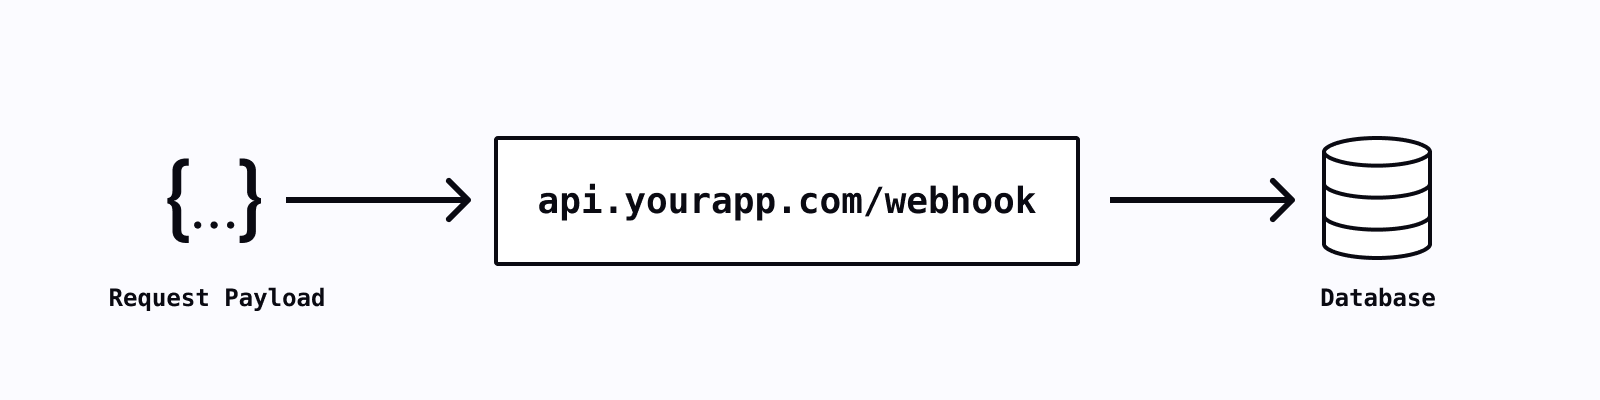 A simple webhook as part of your API server